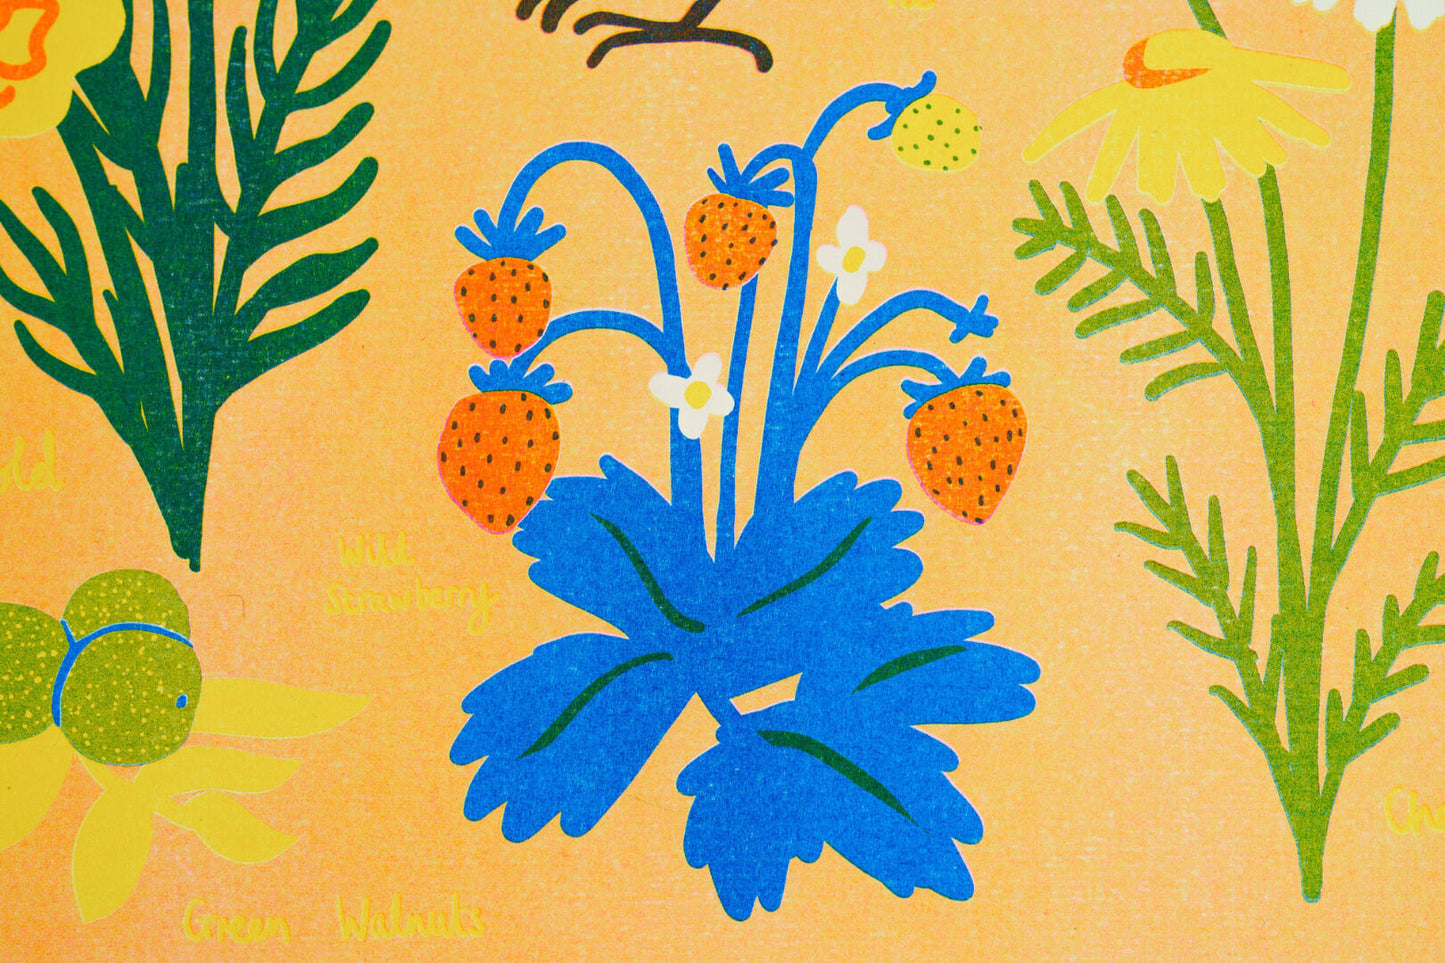 July Foraging Riso Print